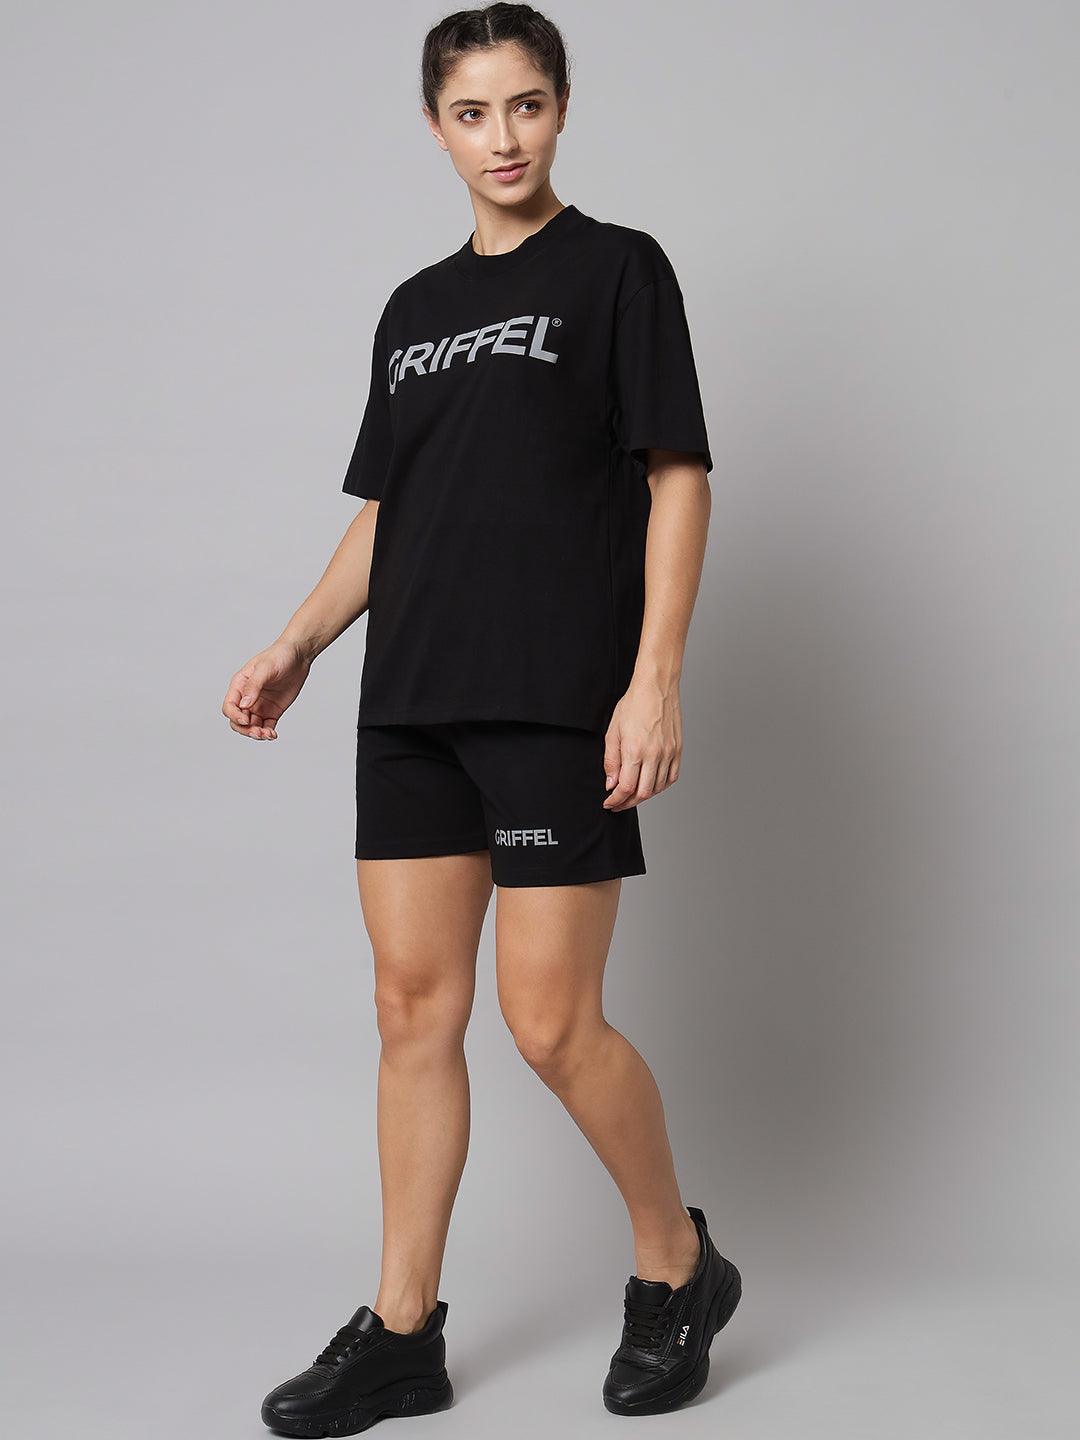 GRIFFEL Women Black Printed Oversized Loose fit T-shirt and Short Set - griffel